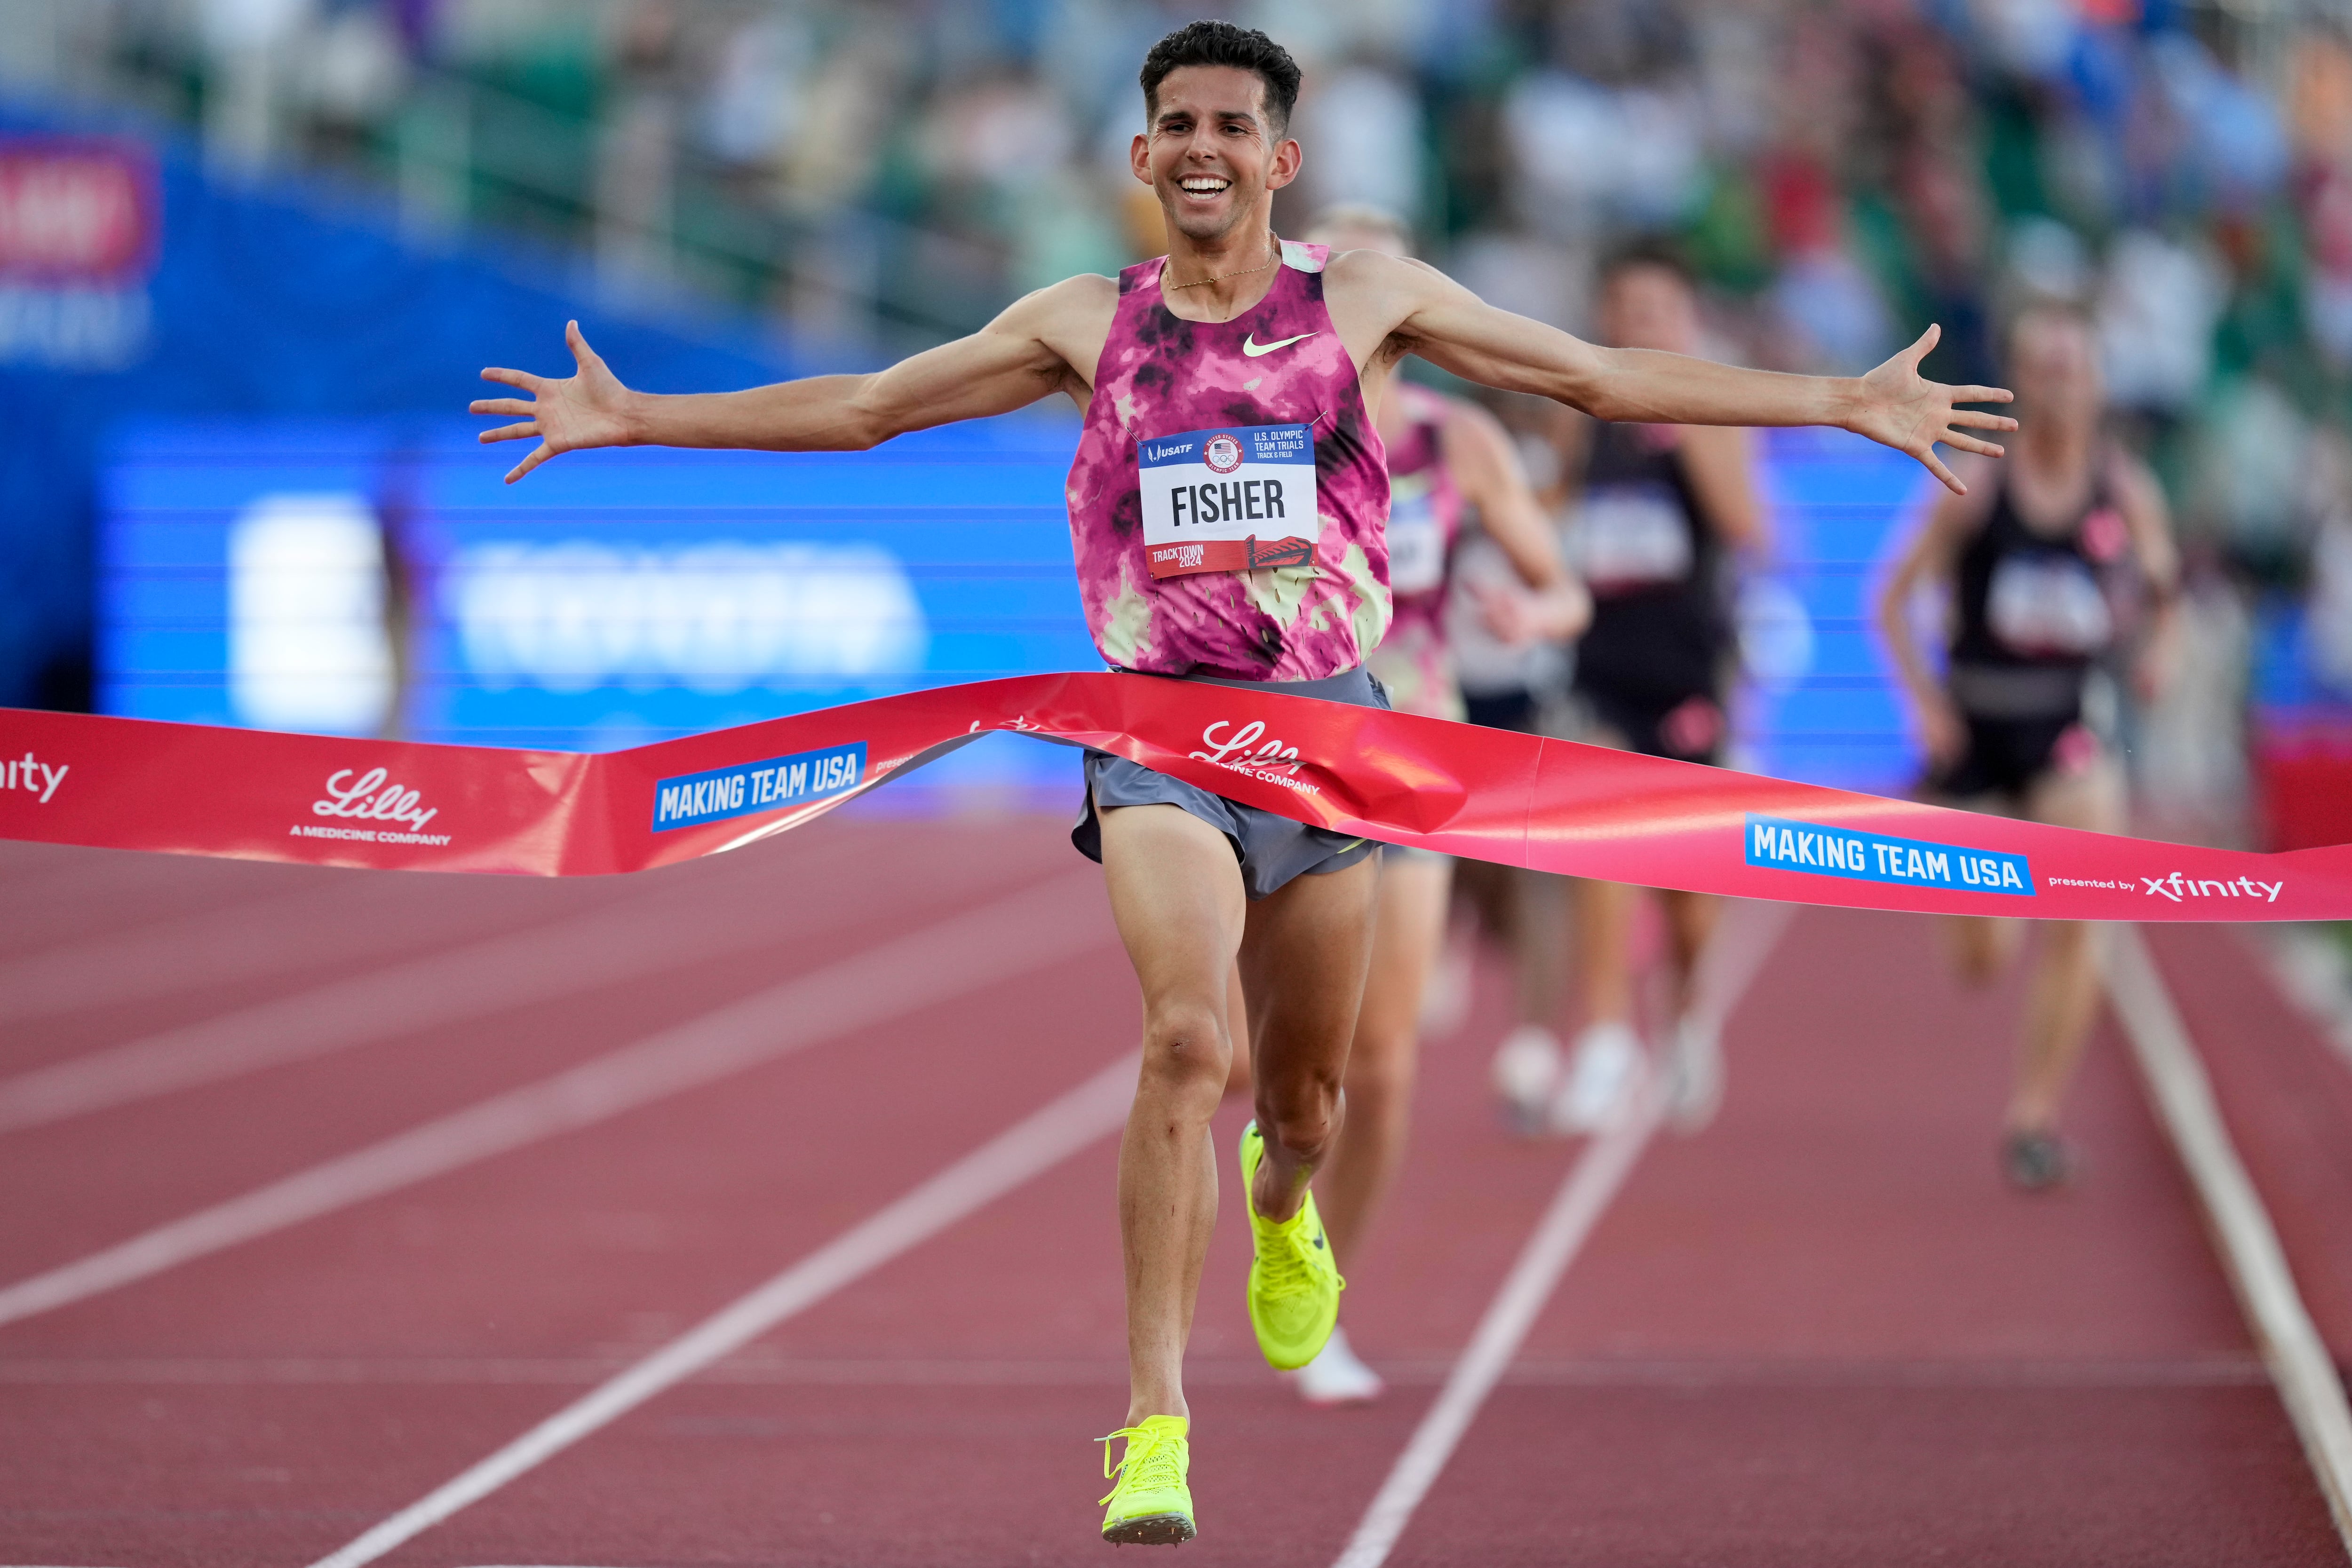 (Charlie Neibergall | AP) Grant Fisher wins the final in the men's 10000-meter run during the U.S. Track and Field Olympic Team Trials Friday, June 21, 2024, in Eugene, Ore.